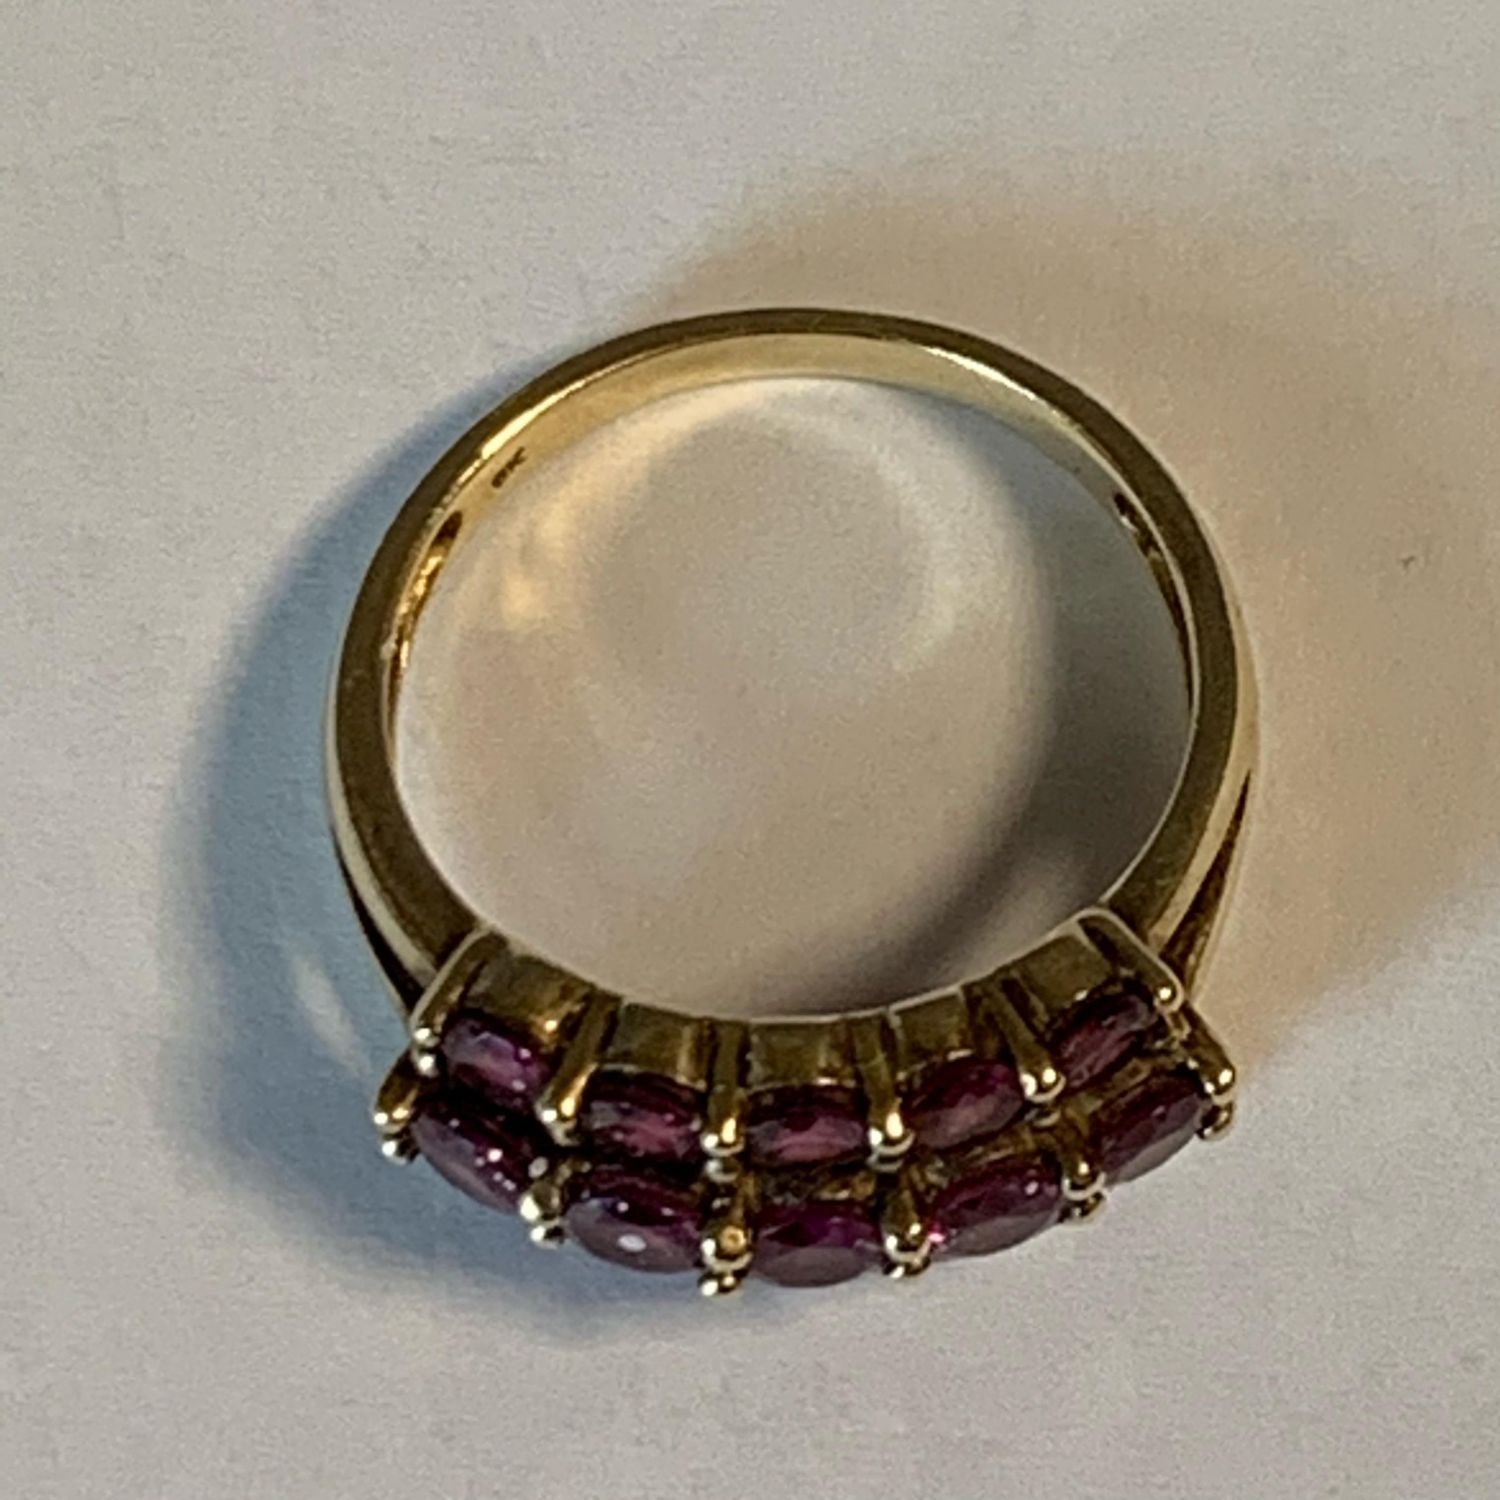 9ct Garnet Multi Stone Ring - Jewellery & Gold - Hemswell Antique Centres